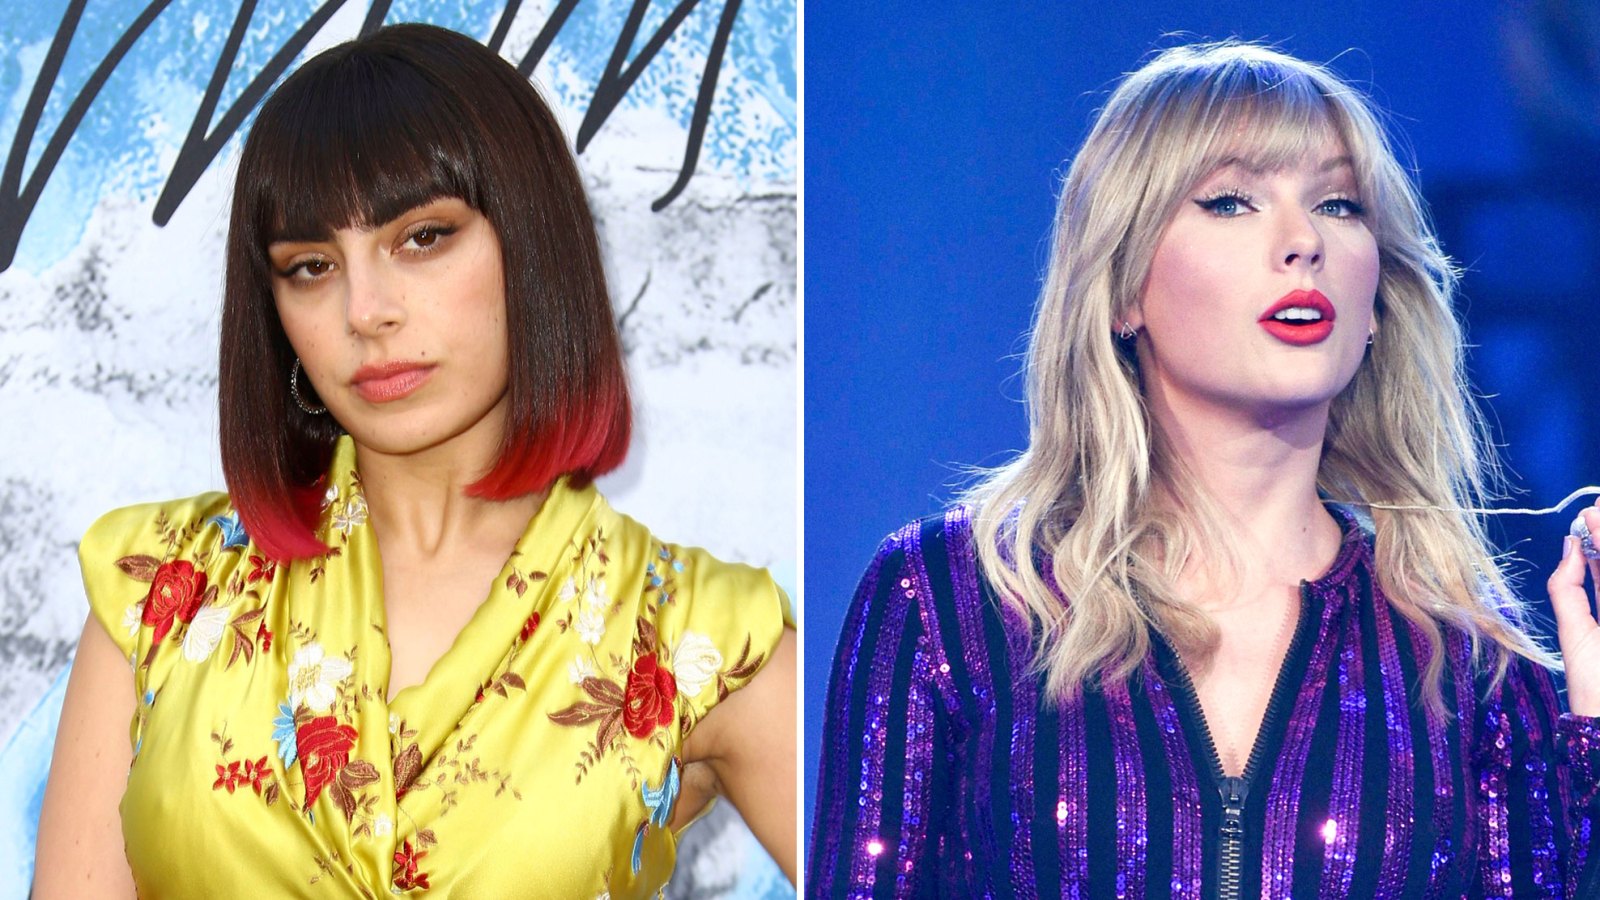 Charli XCX Shades Taylor Swift Fans After Performing on the ‘Reputation’ Tour I Felt Like I was ‘Waving to 5-Year-Olds’